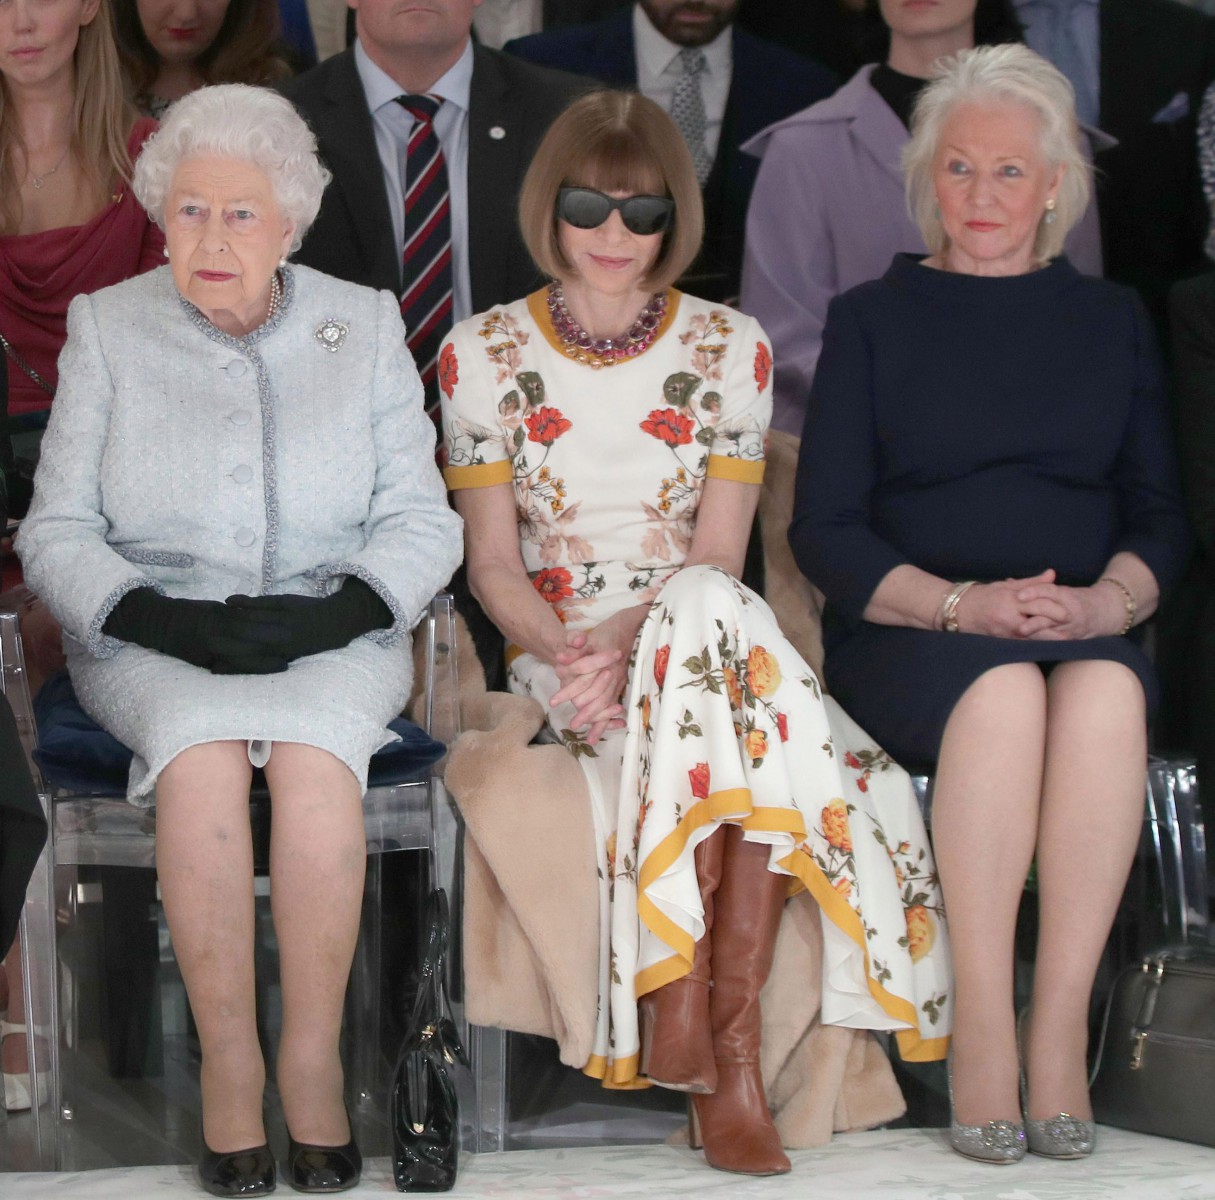 The Queen pictured with Angela, right, and Anna Wintour at a show during London Fashion Week in 2018